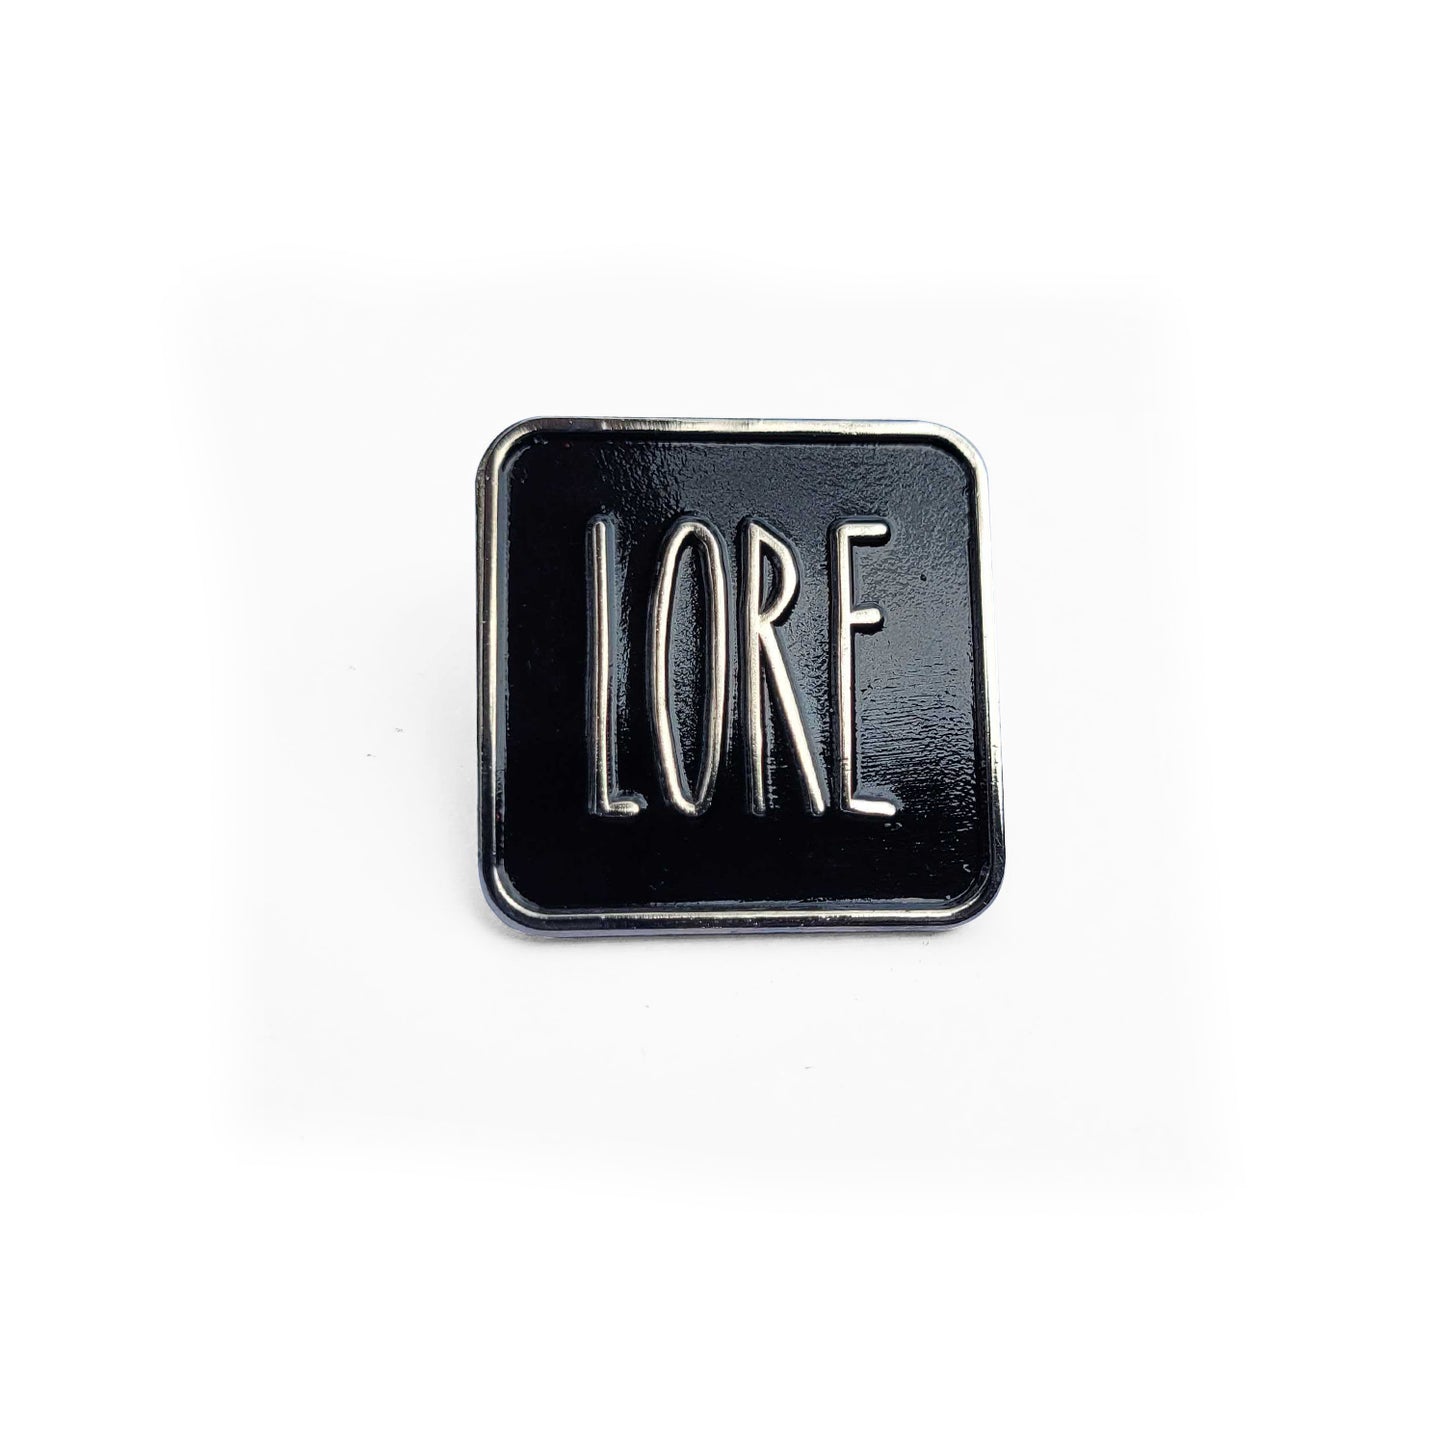 A silver enamel pin with a black rectangular front, which reads LORE in tall, skinny white font